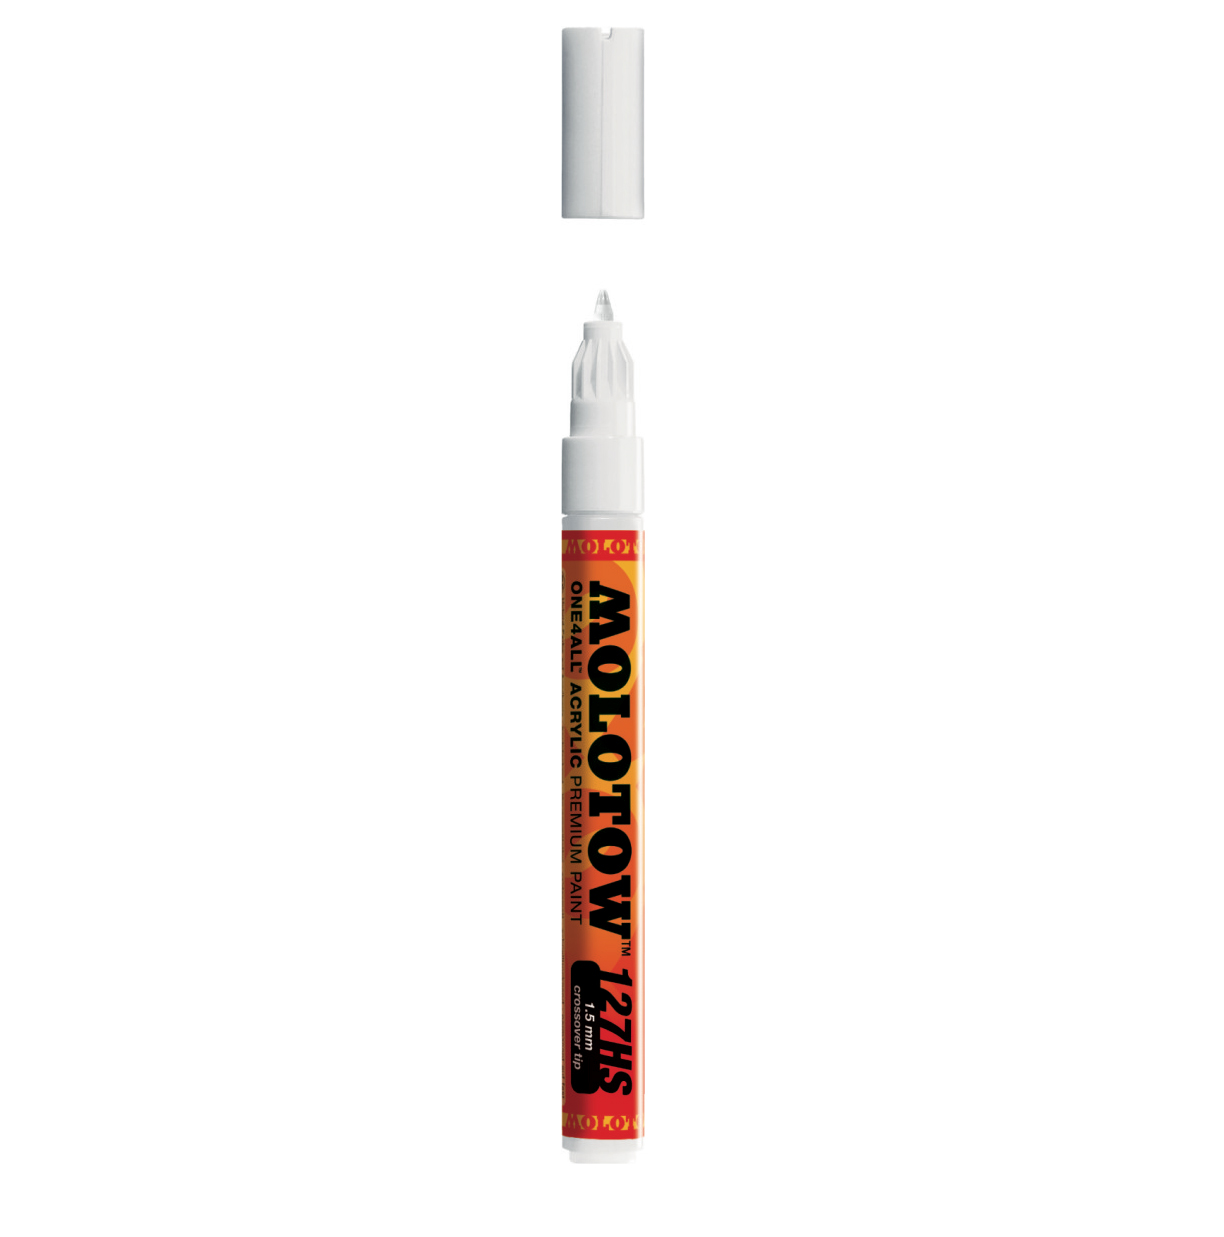 Molotow Co Tip 1.5Mm Signal White Paint Mrkr